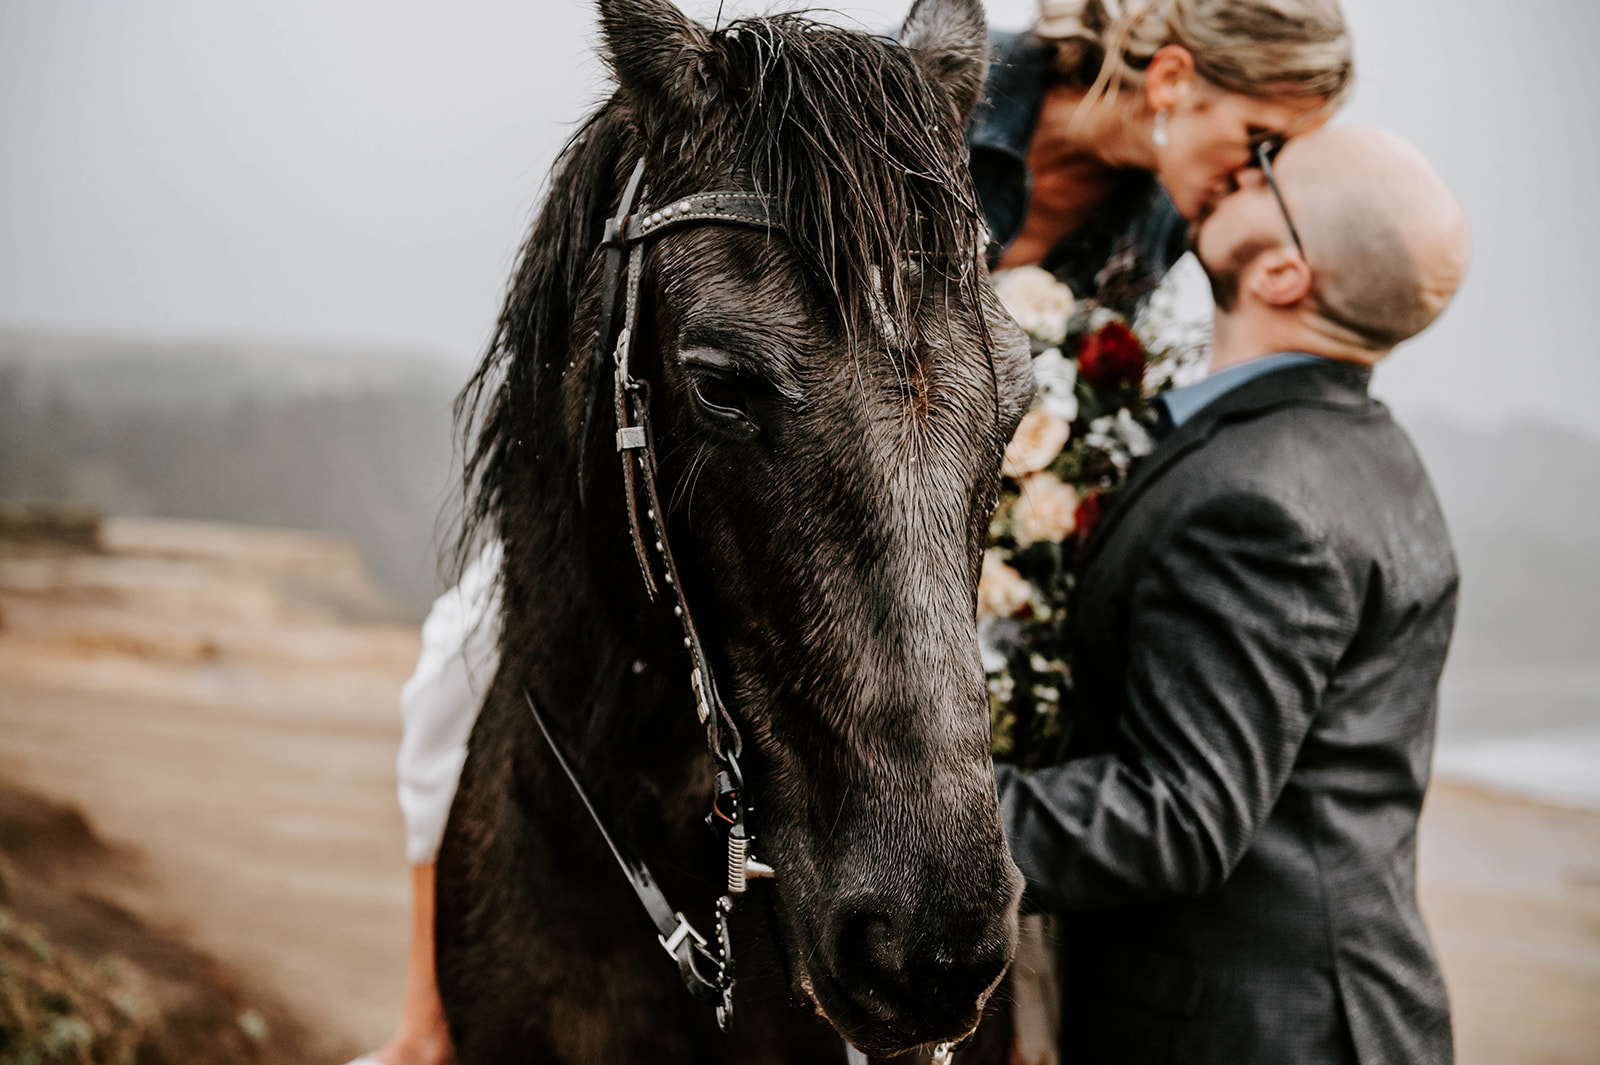 A bride leaning down to kiss the groom while she rides a horse on their wedding day while it rains.